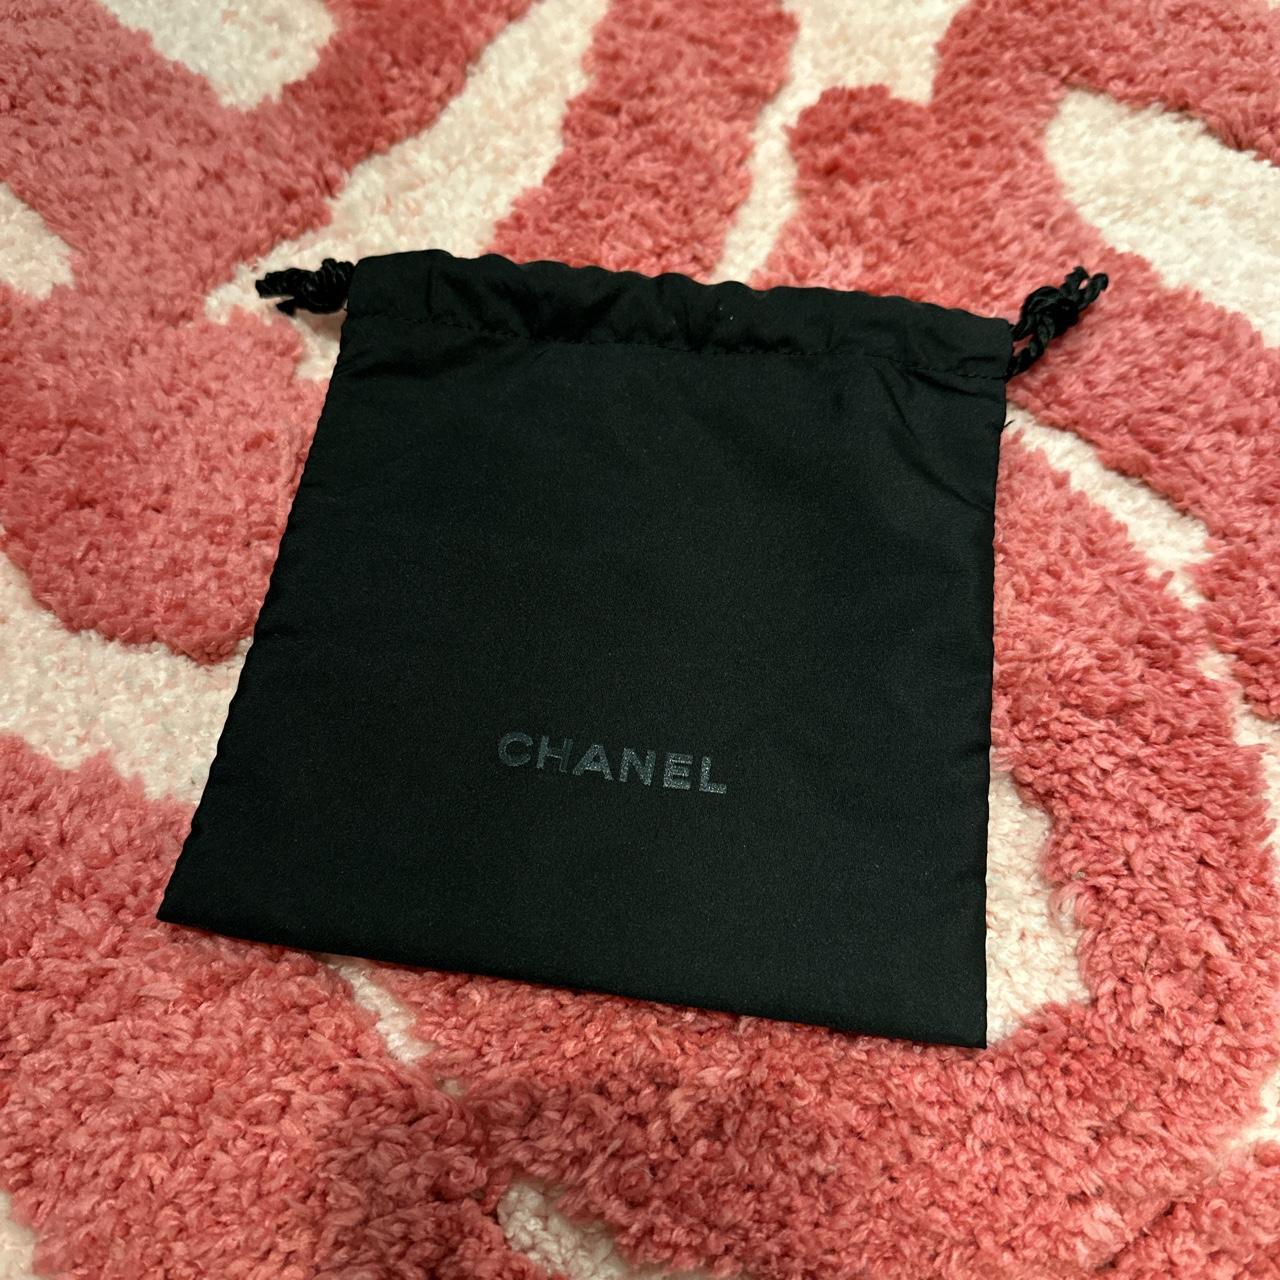 Chanel dust bag mini Came with online purchase - Depop